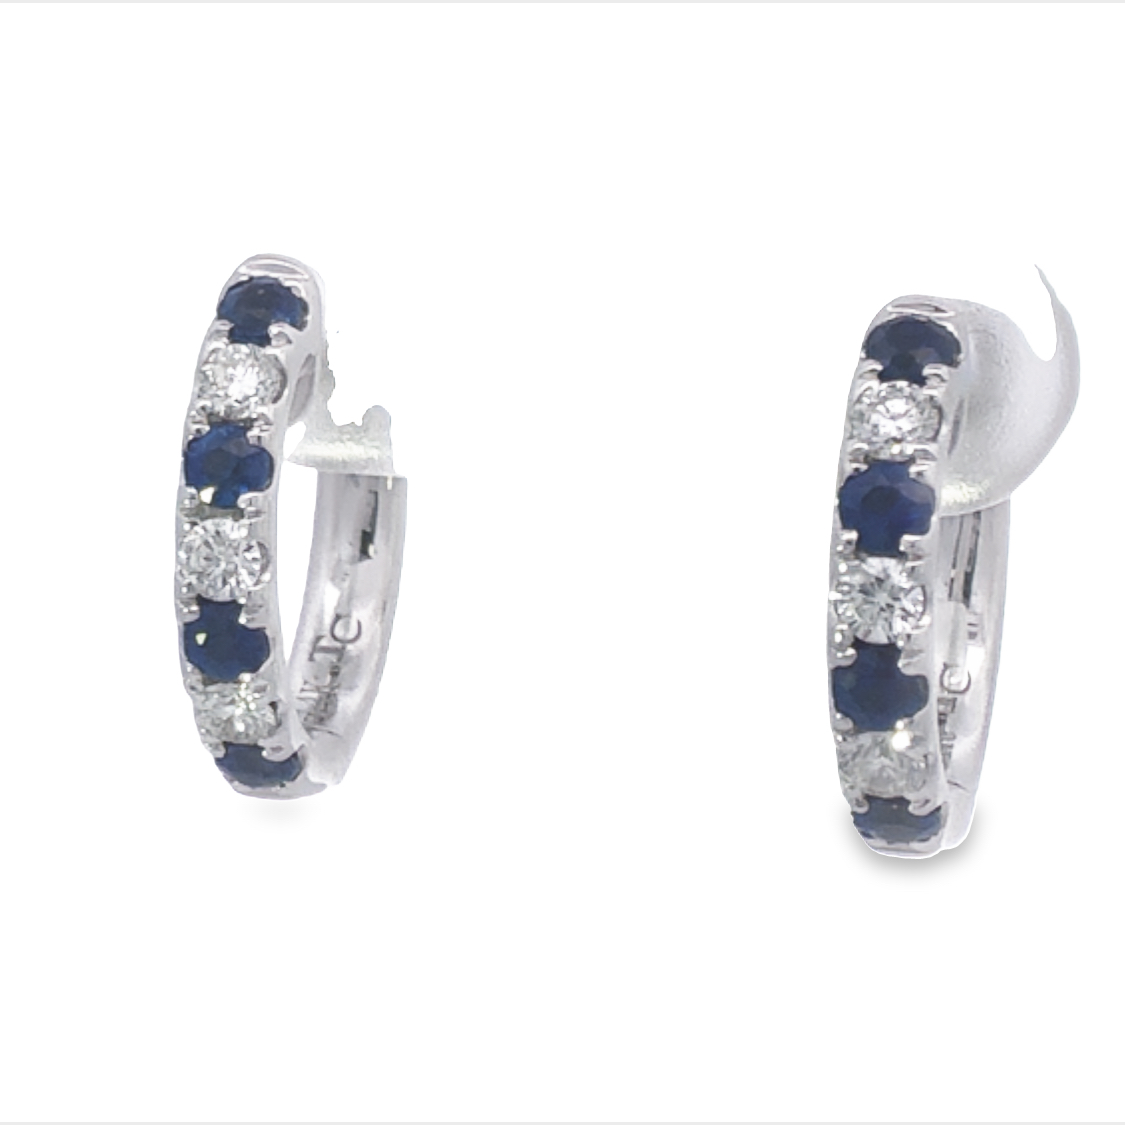 14K White Gold Hoop Earrings with 8 Round Blue Sapphires 0.47 Tcw & 6 Round Diamonds 0.24 Tcw